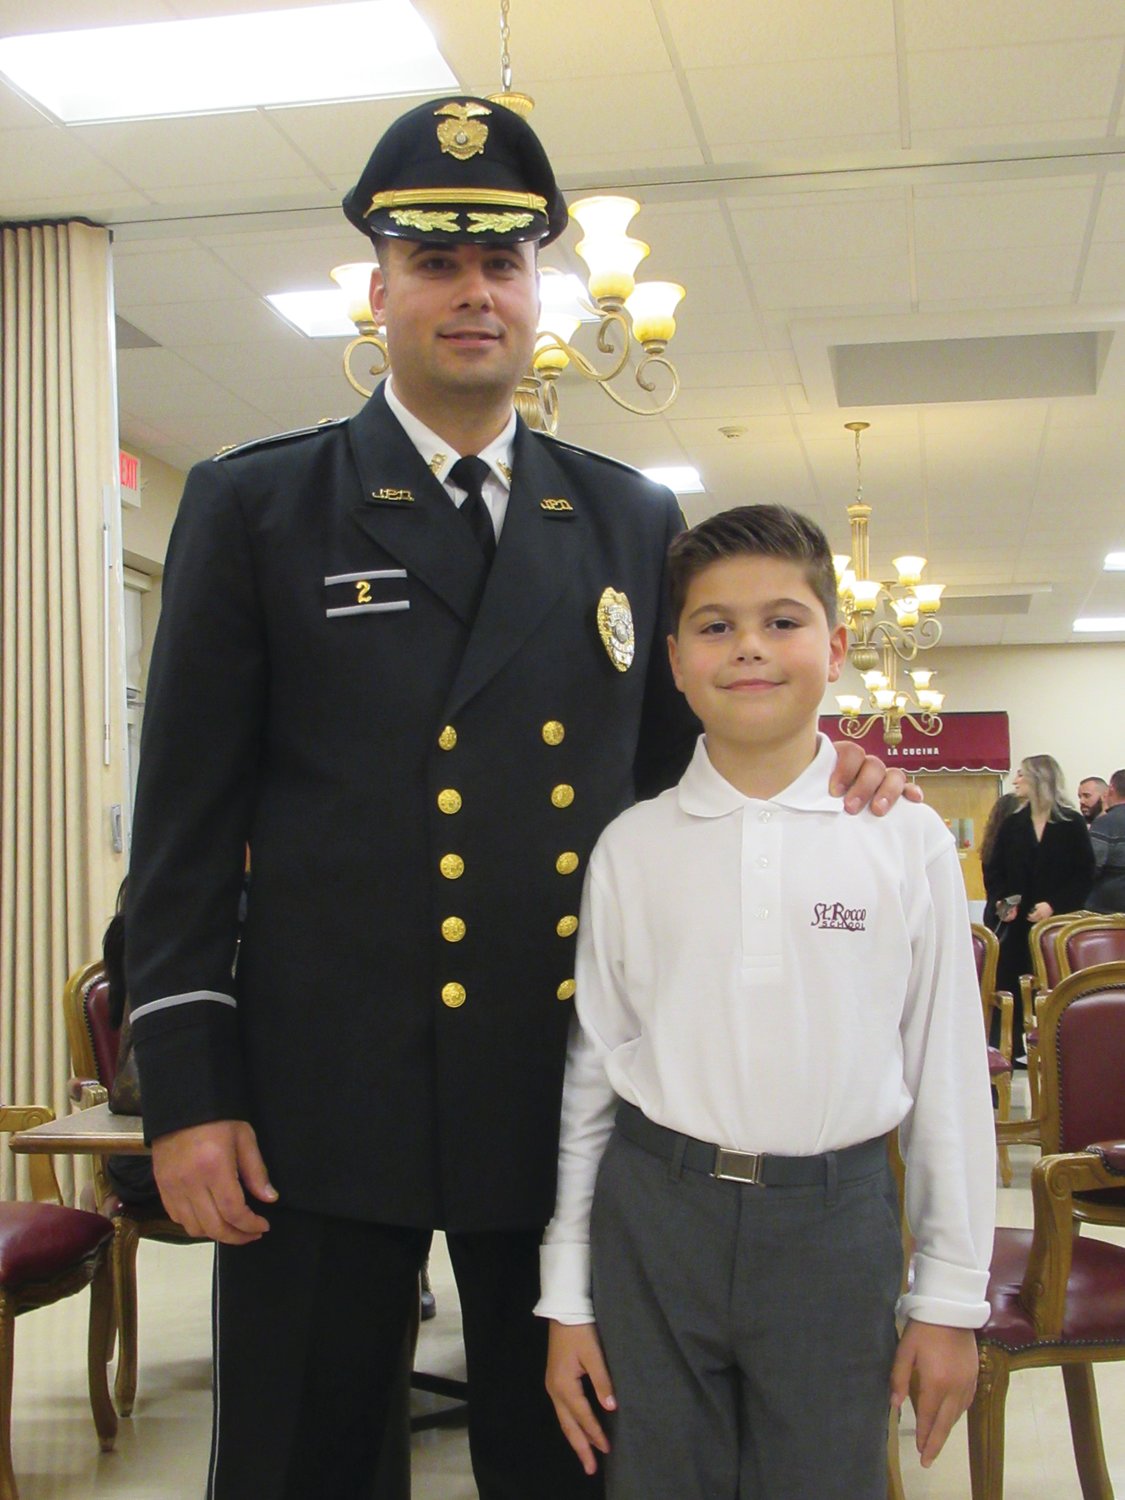 PROUD POP: Johnston Police Department Deputy Chief Mark Vieira is joined by his son, Anthony, who was called upon to give the Pledge of Allegiance for the recent Recognition of Excellence Awards Ceremony.